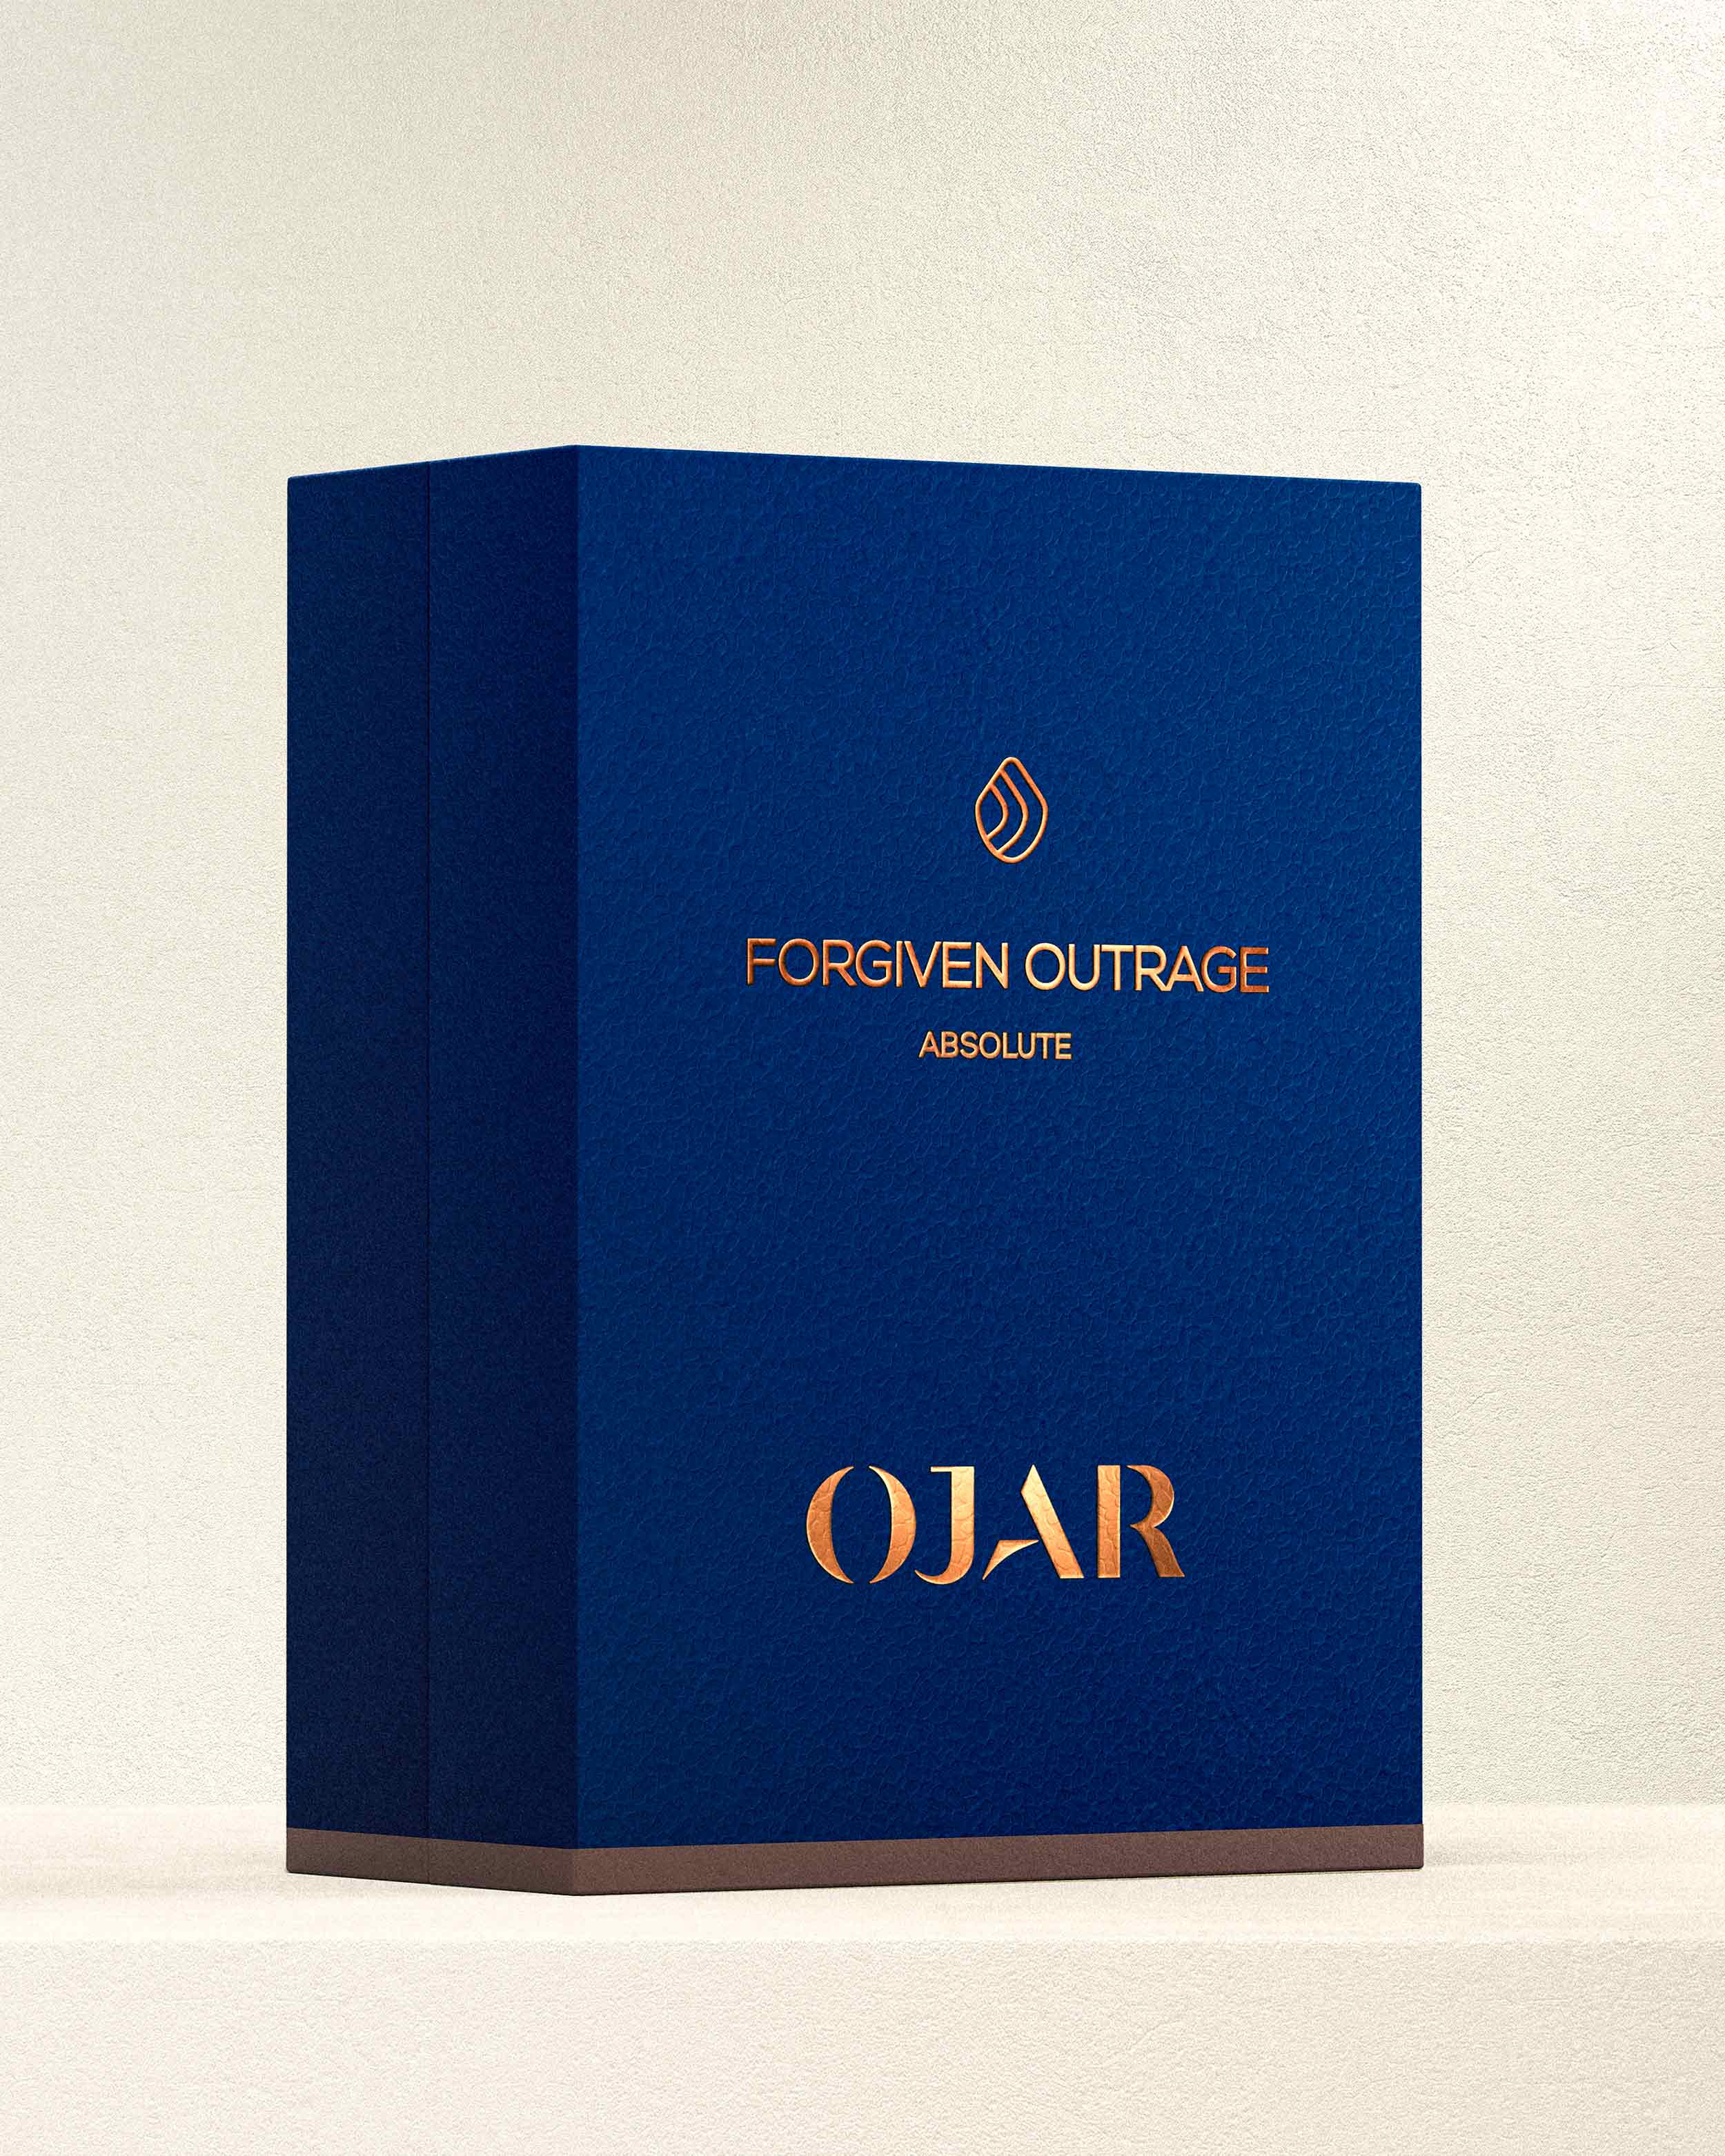 OJAR Absolute Forgiven Outrage Perfume Pack